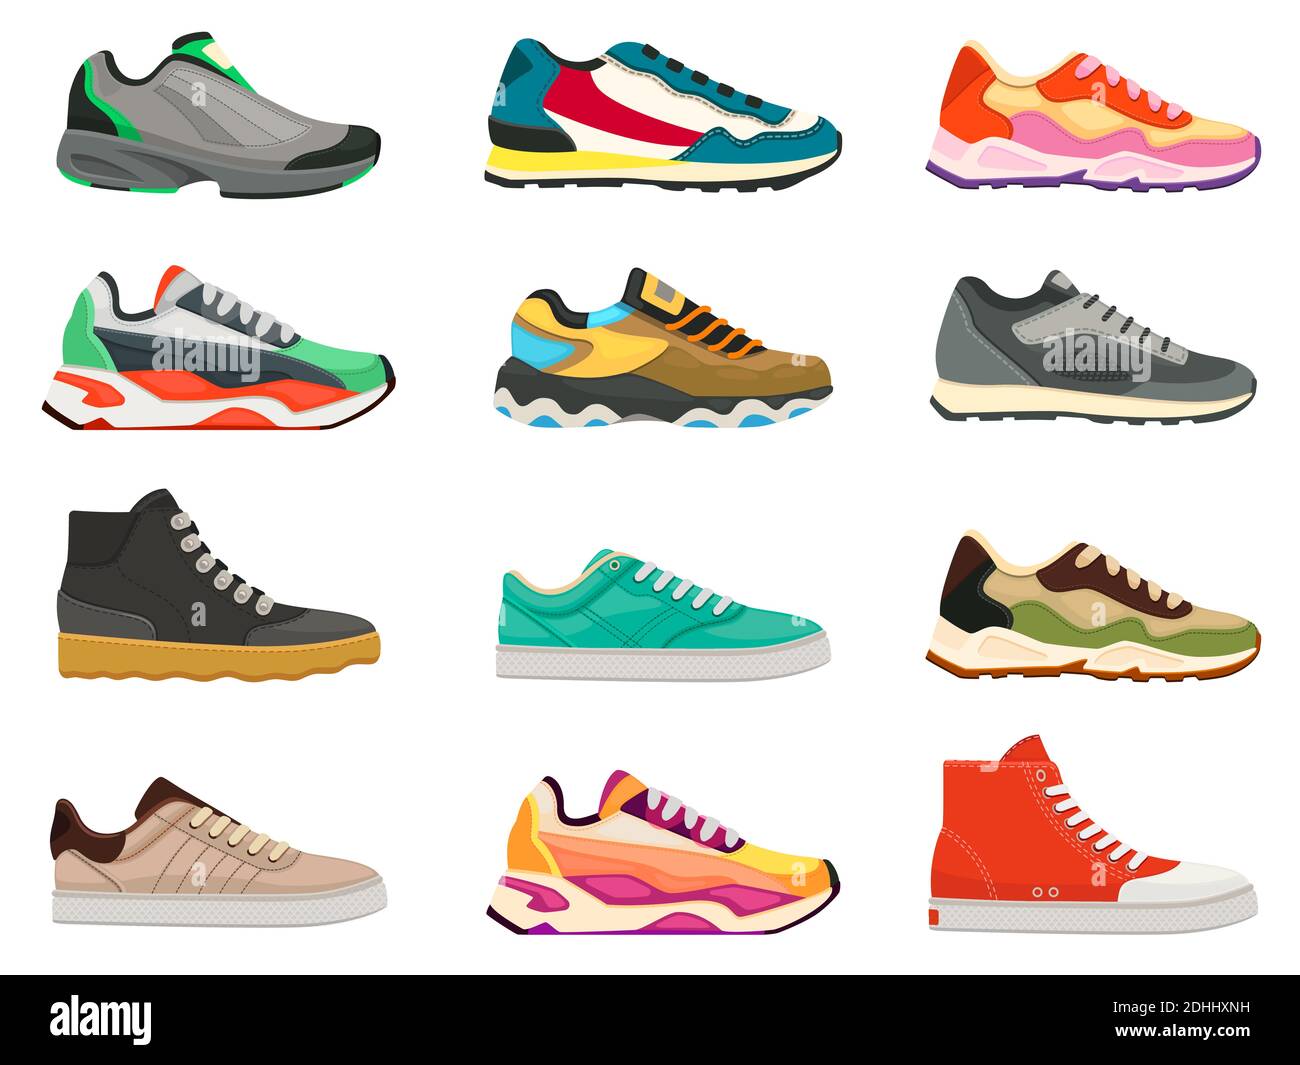 Sneakers shoes. Fitness footwear for sport, running and training. Colorful modern shoe designs. Sneaker side view cartoon icons vector set Stock Vector